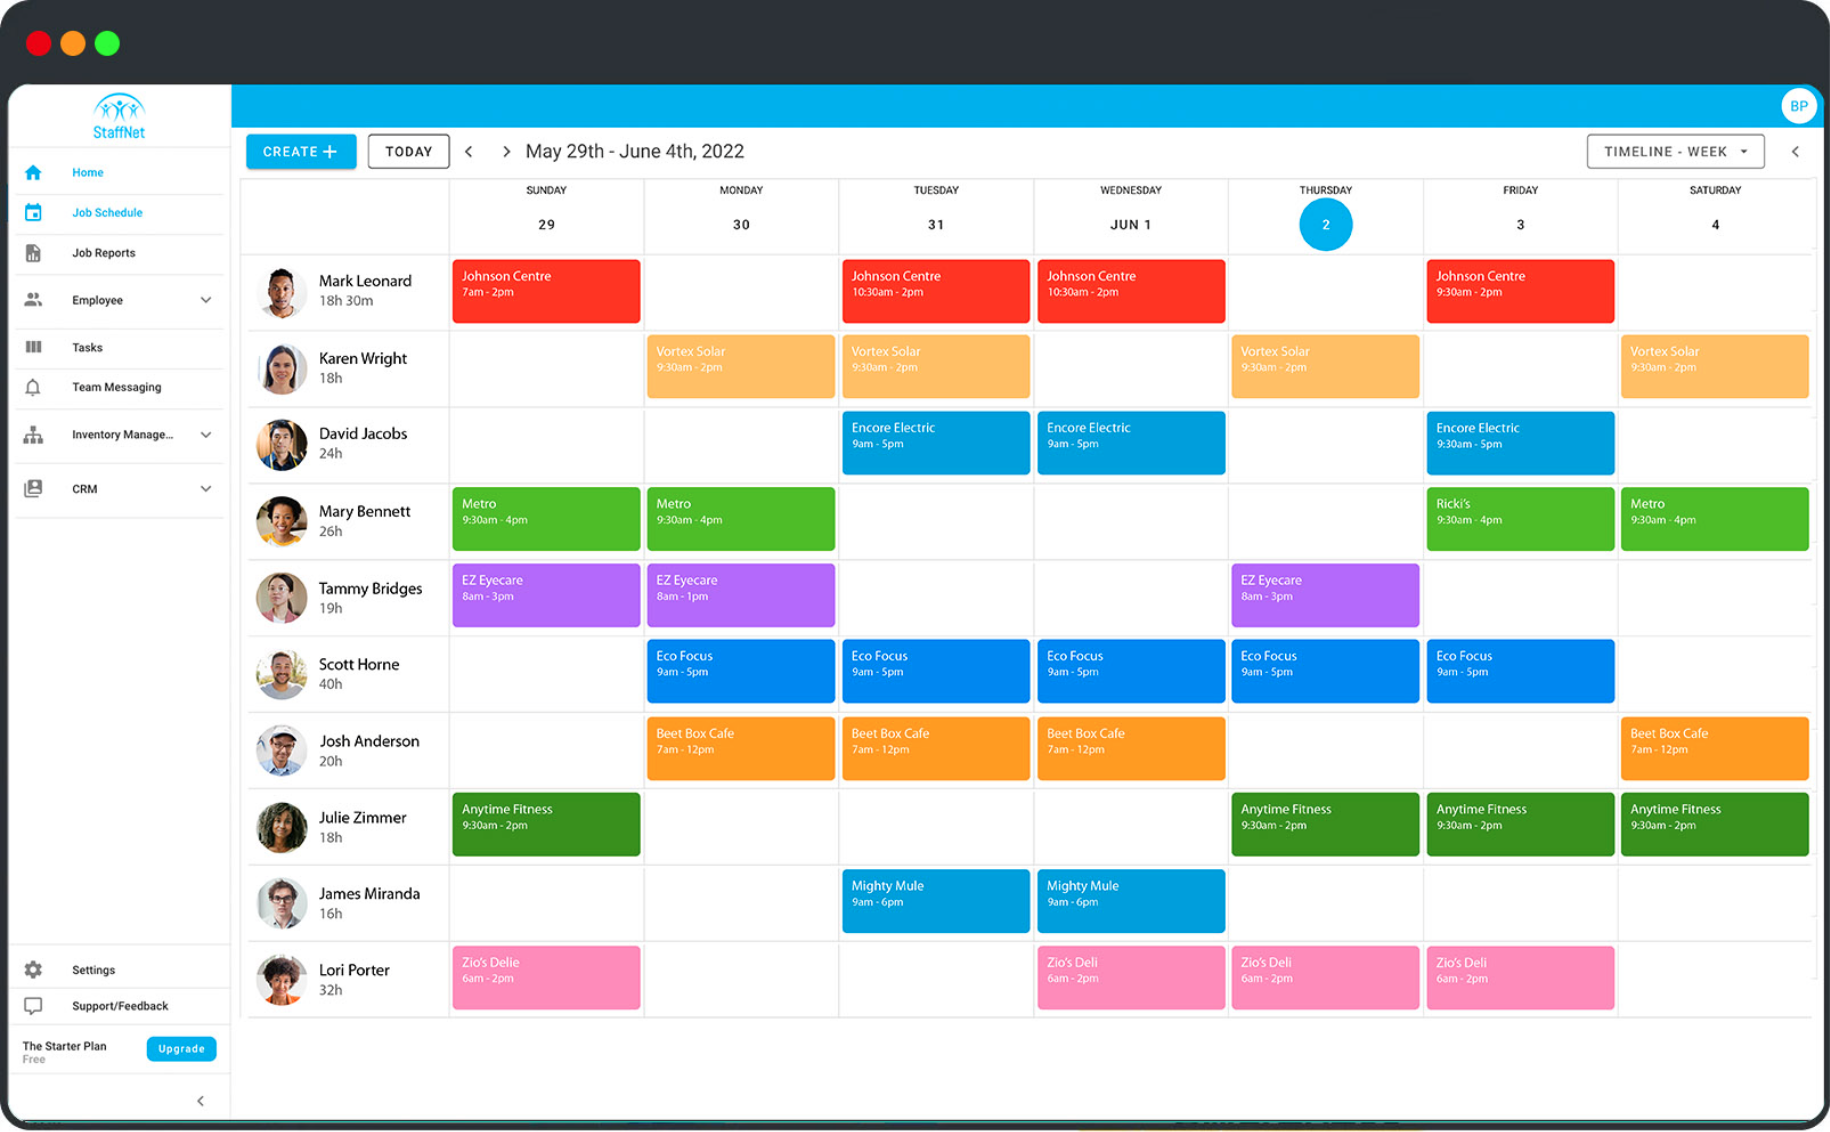 Timeline View in Scheduling Feature - have a bird eye view of your business' week ahead